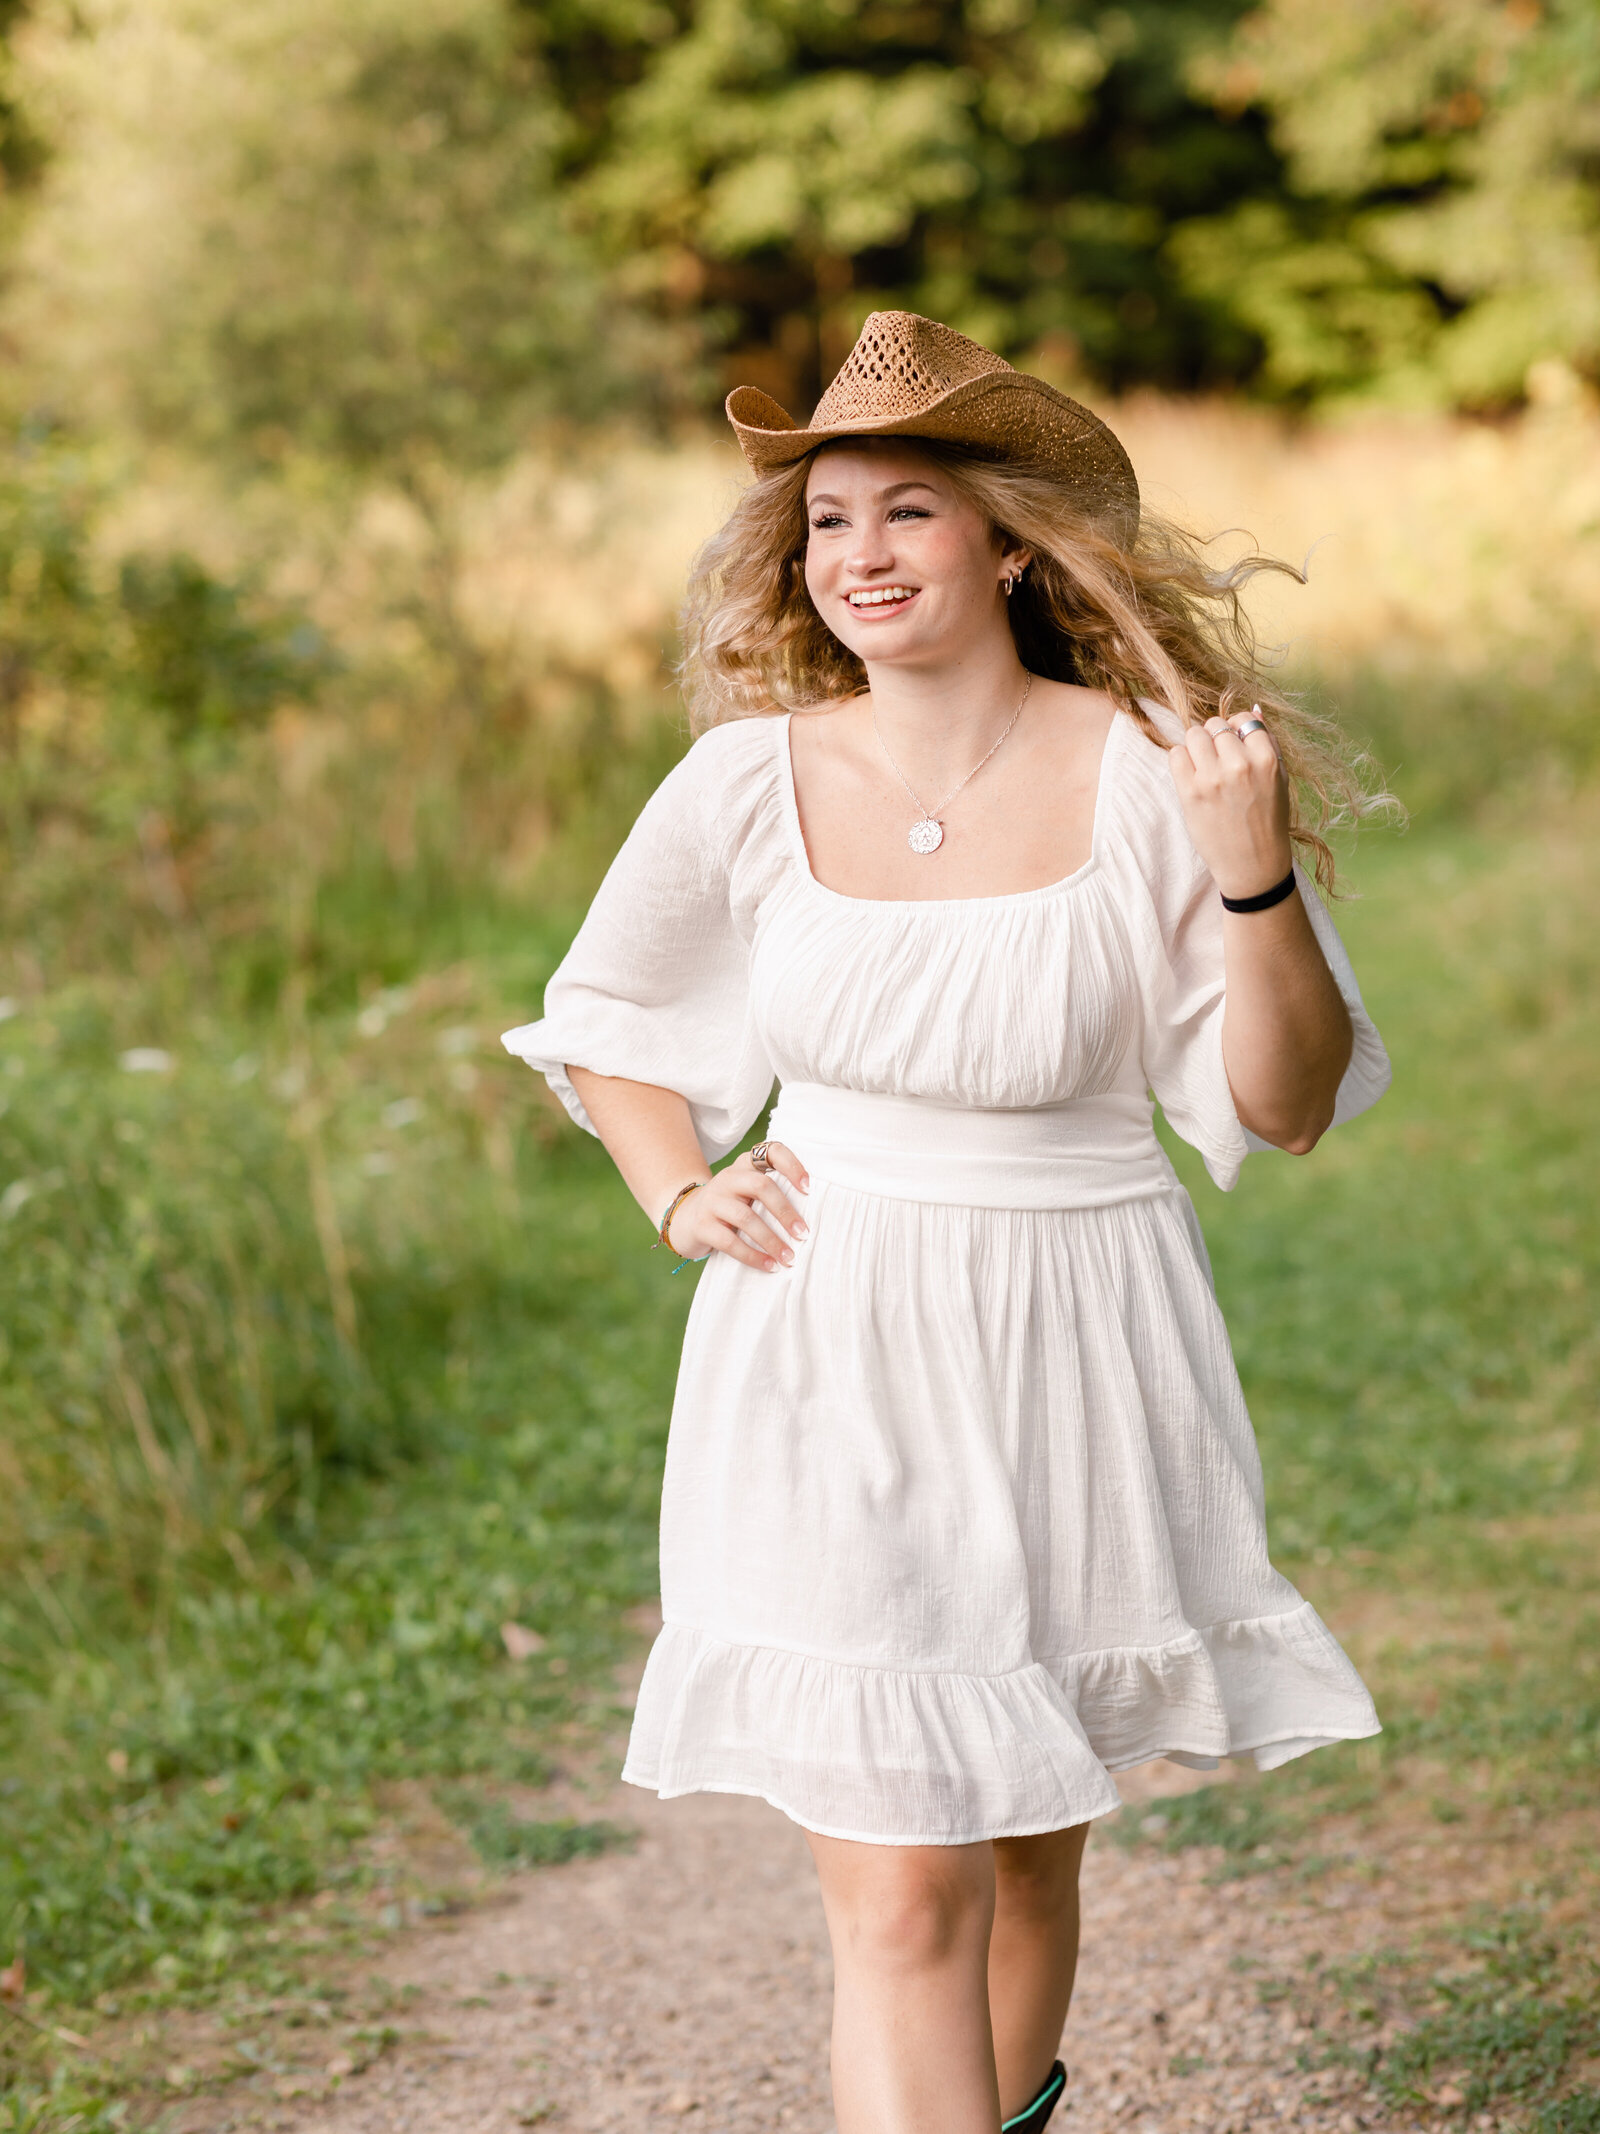 girl with cowboy hat and white dress walking in park for senior photos